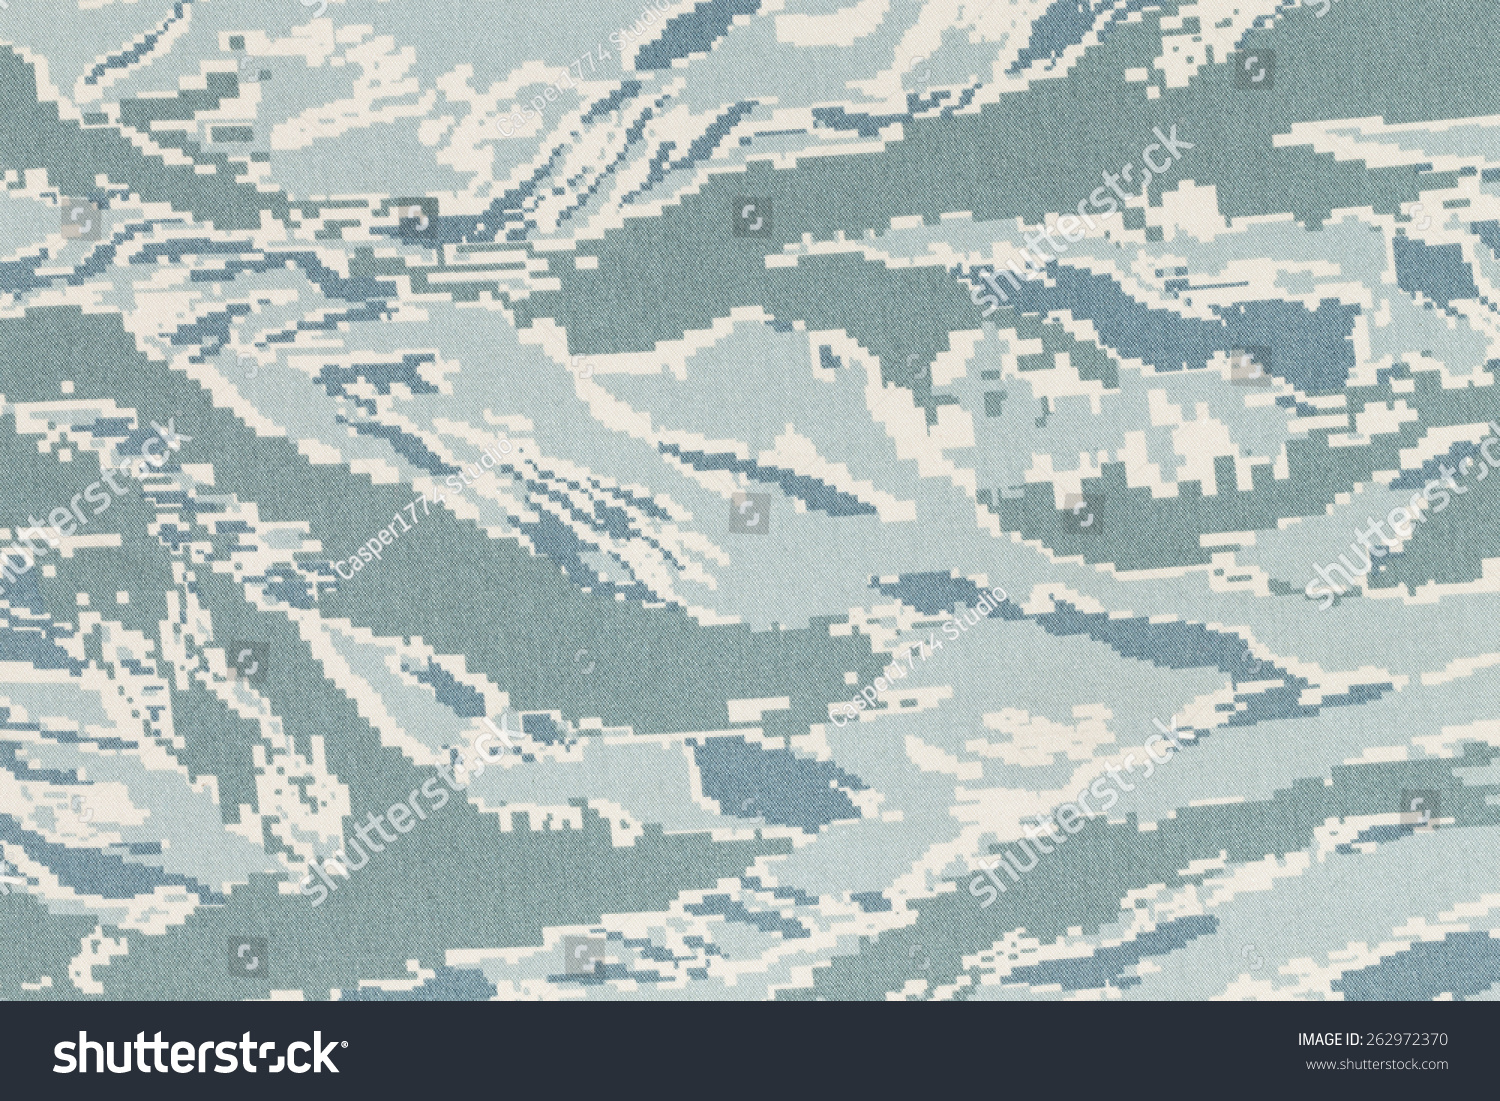 Us Air Force Digital Tigerstripe Camouflage Stock Photo 262972370 ...